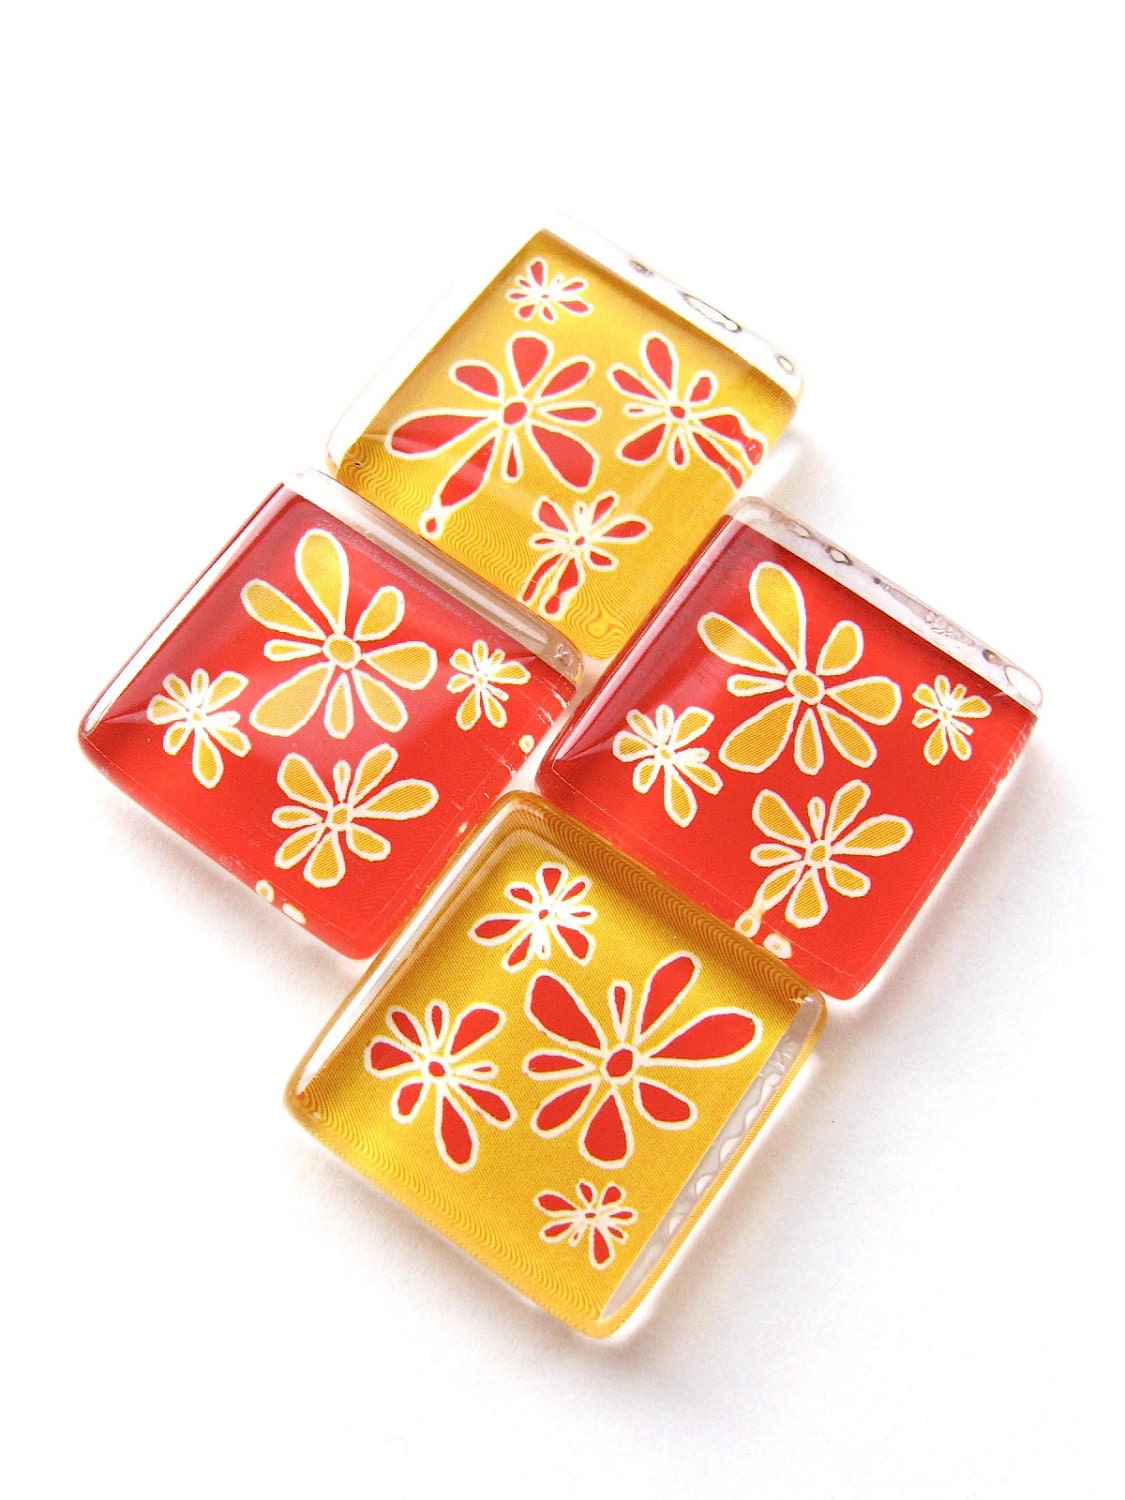 Glass magnets - Set of 4 Mod Flower Blossoms in red and yellow - PurtyBird